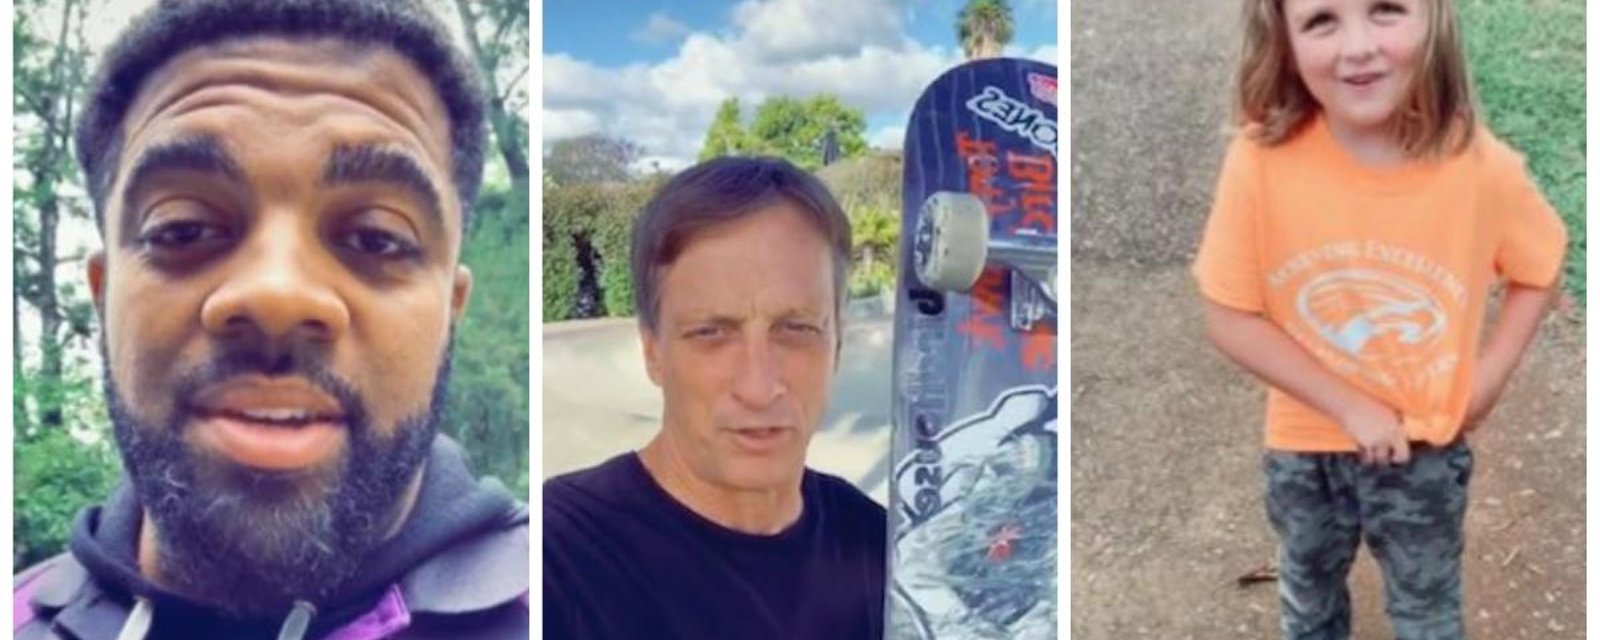 Good guy Fedex Driver helps a young boy deliver a skateboard to Tony Hawk.